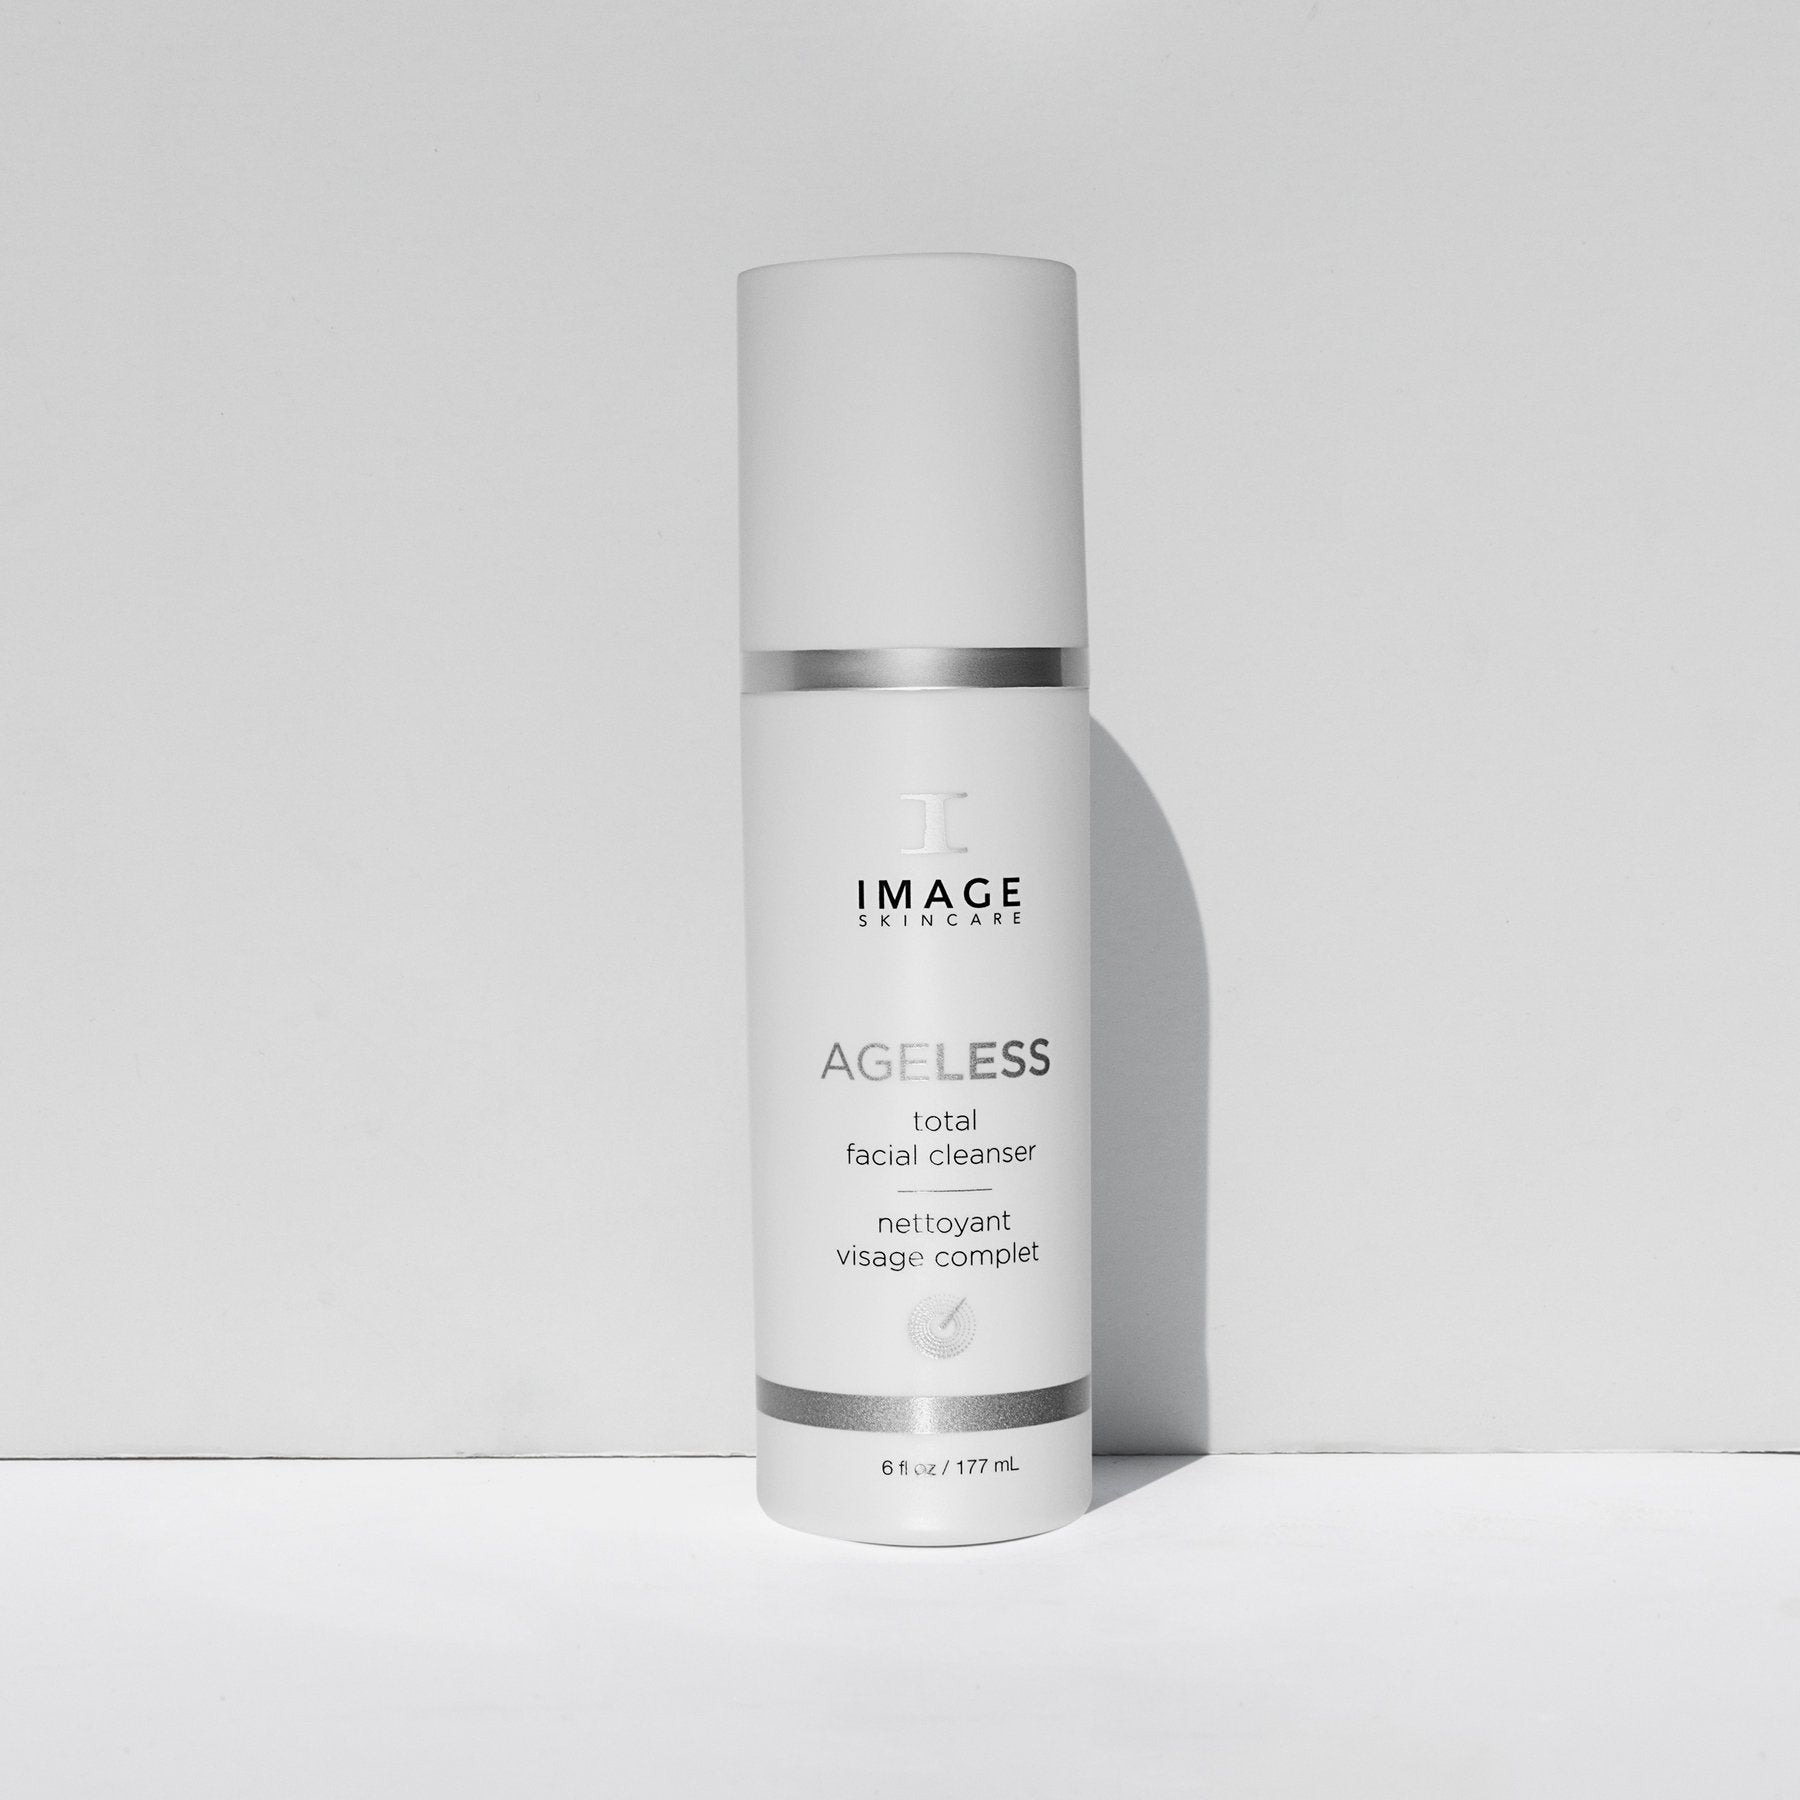 AGELESS total facial cleanser | IMAGE Skincare